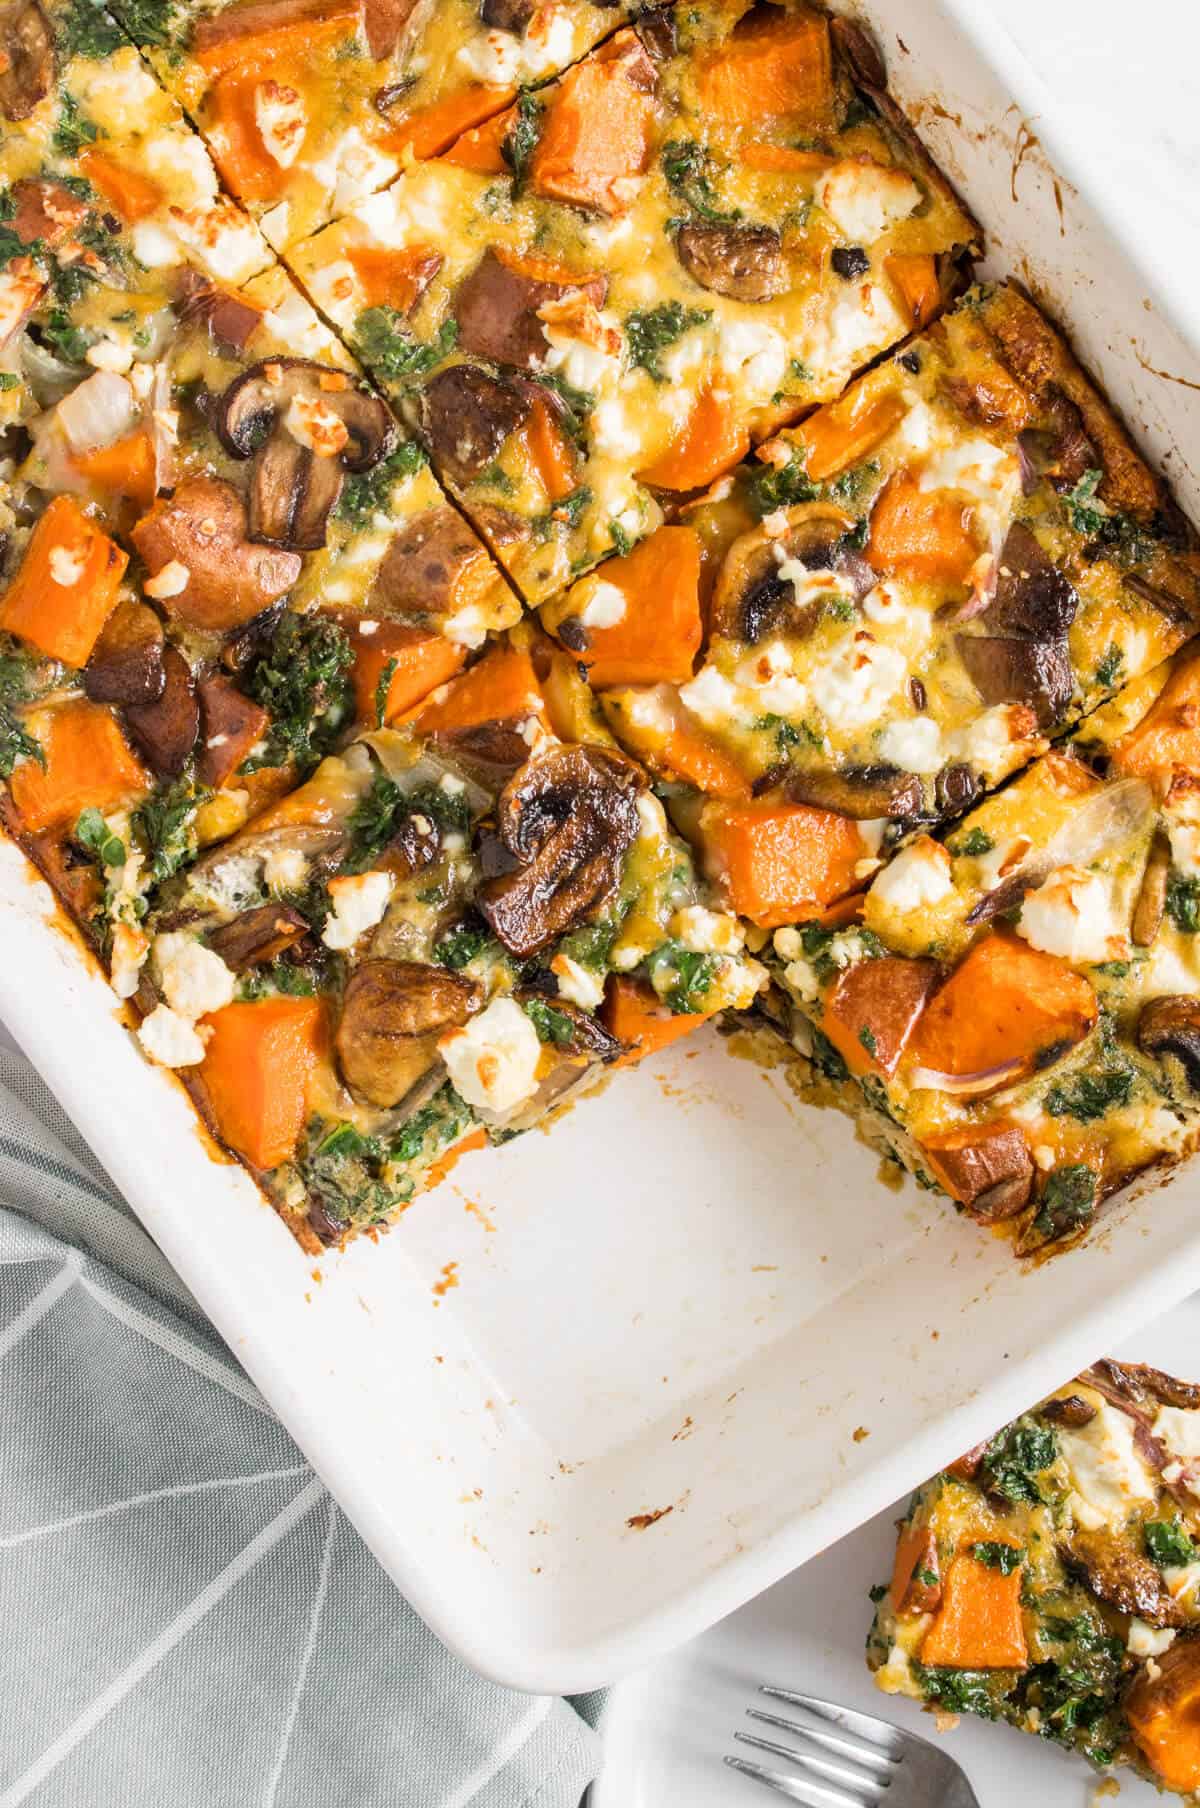 This Is Definitely The Best Pan For Cooking A Frittata